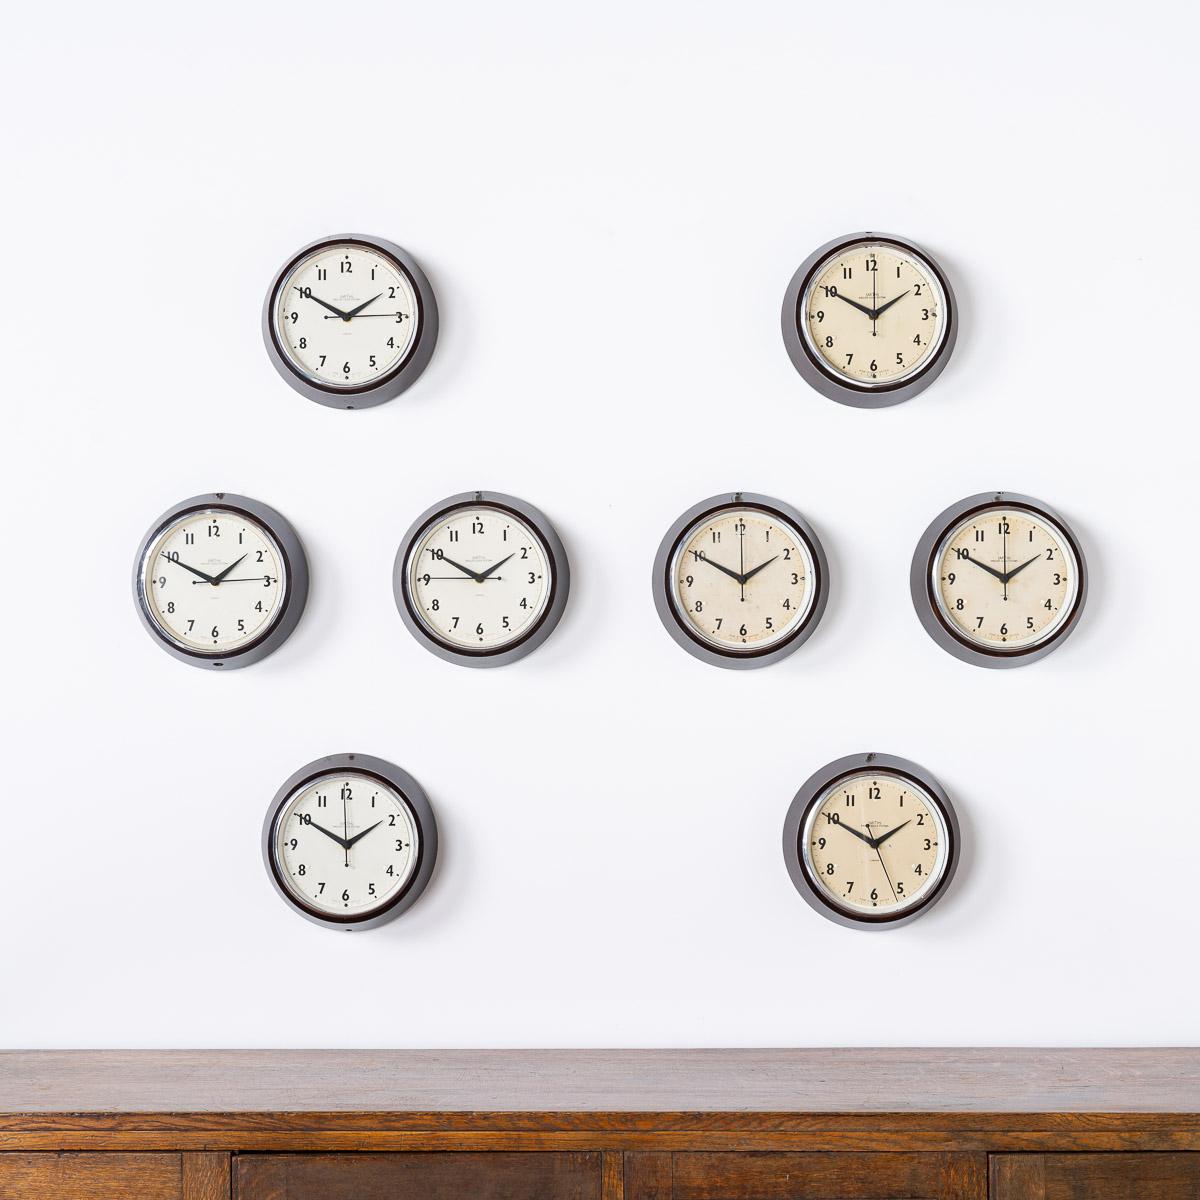 Glass Small Antique Bakelite Factory Clocks by Smiths English Clock Systems (6)